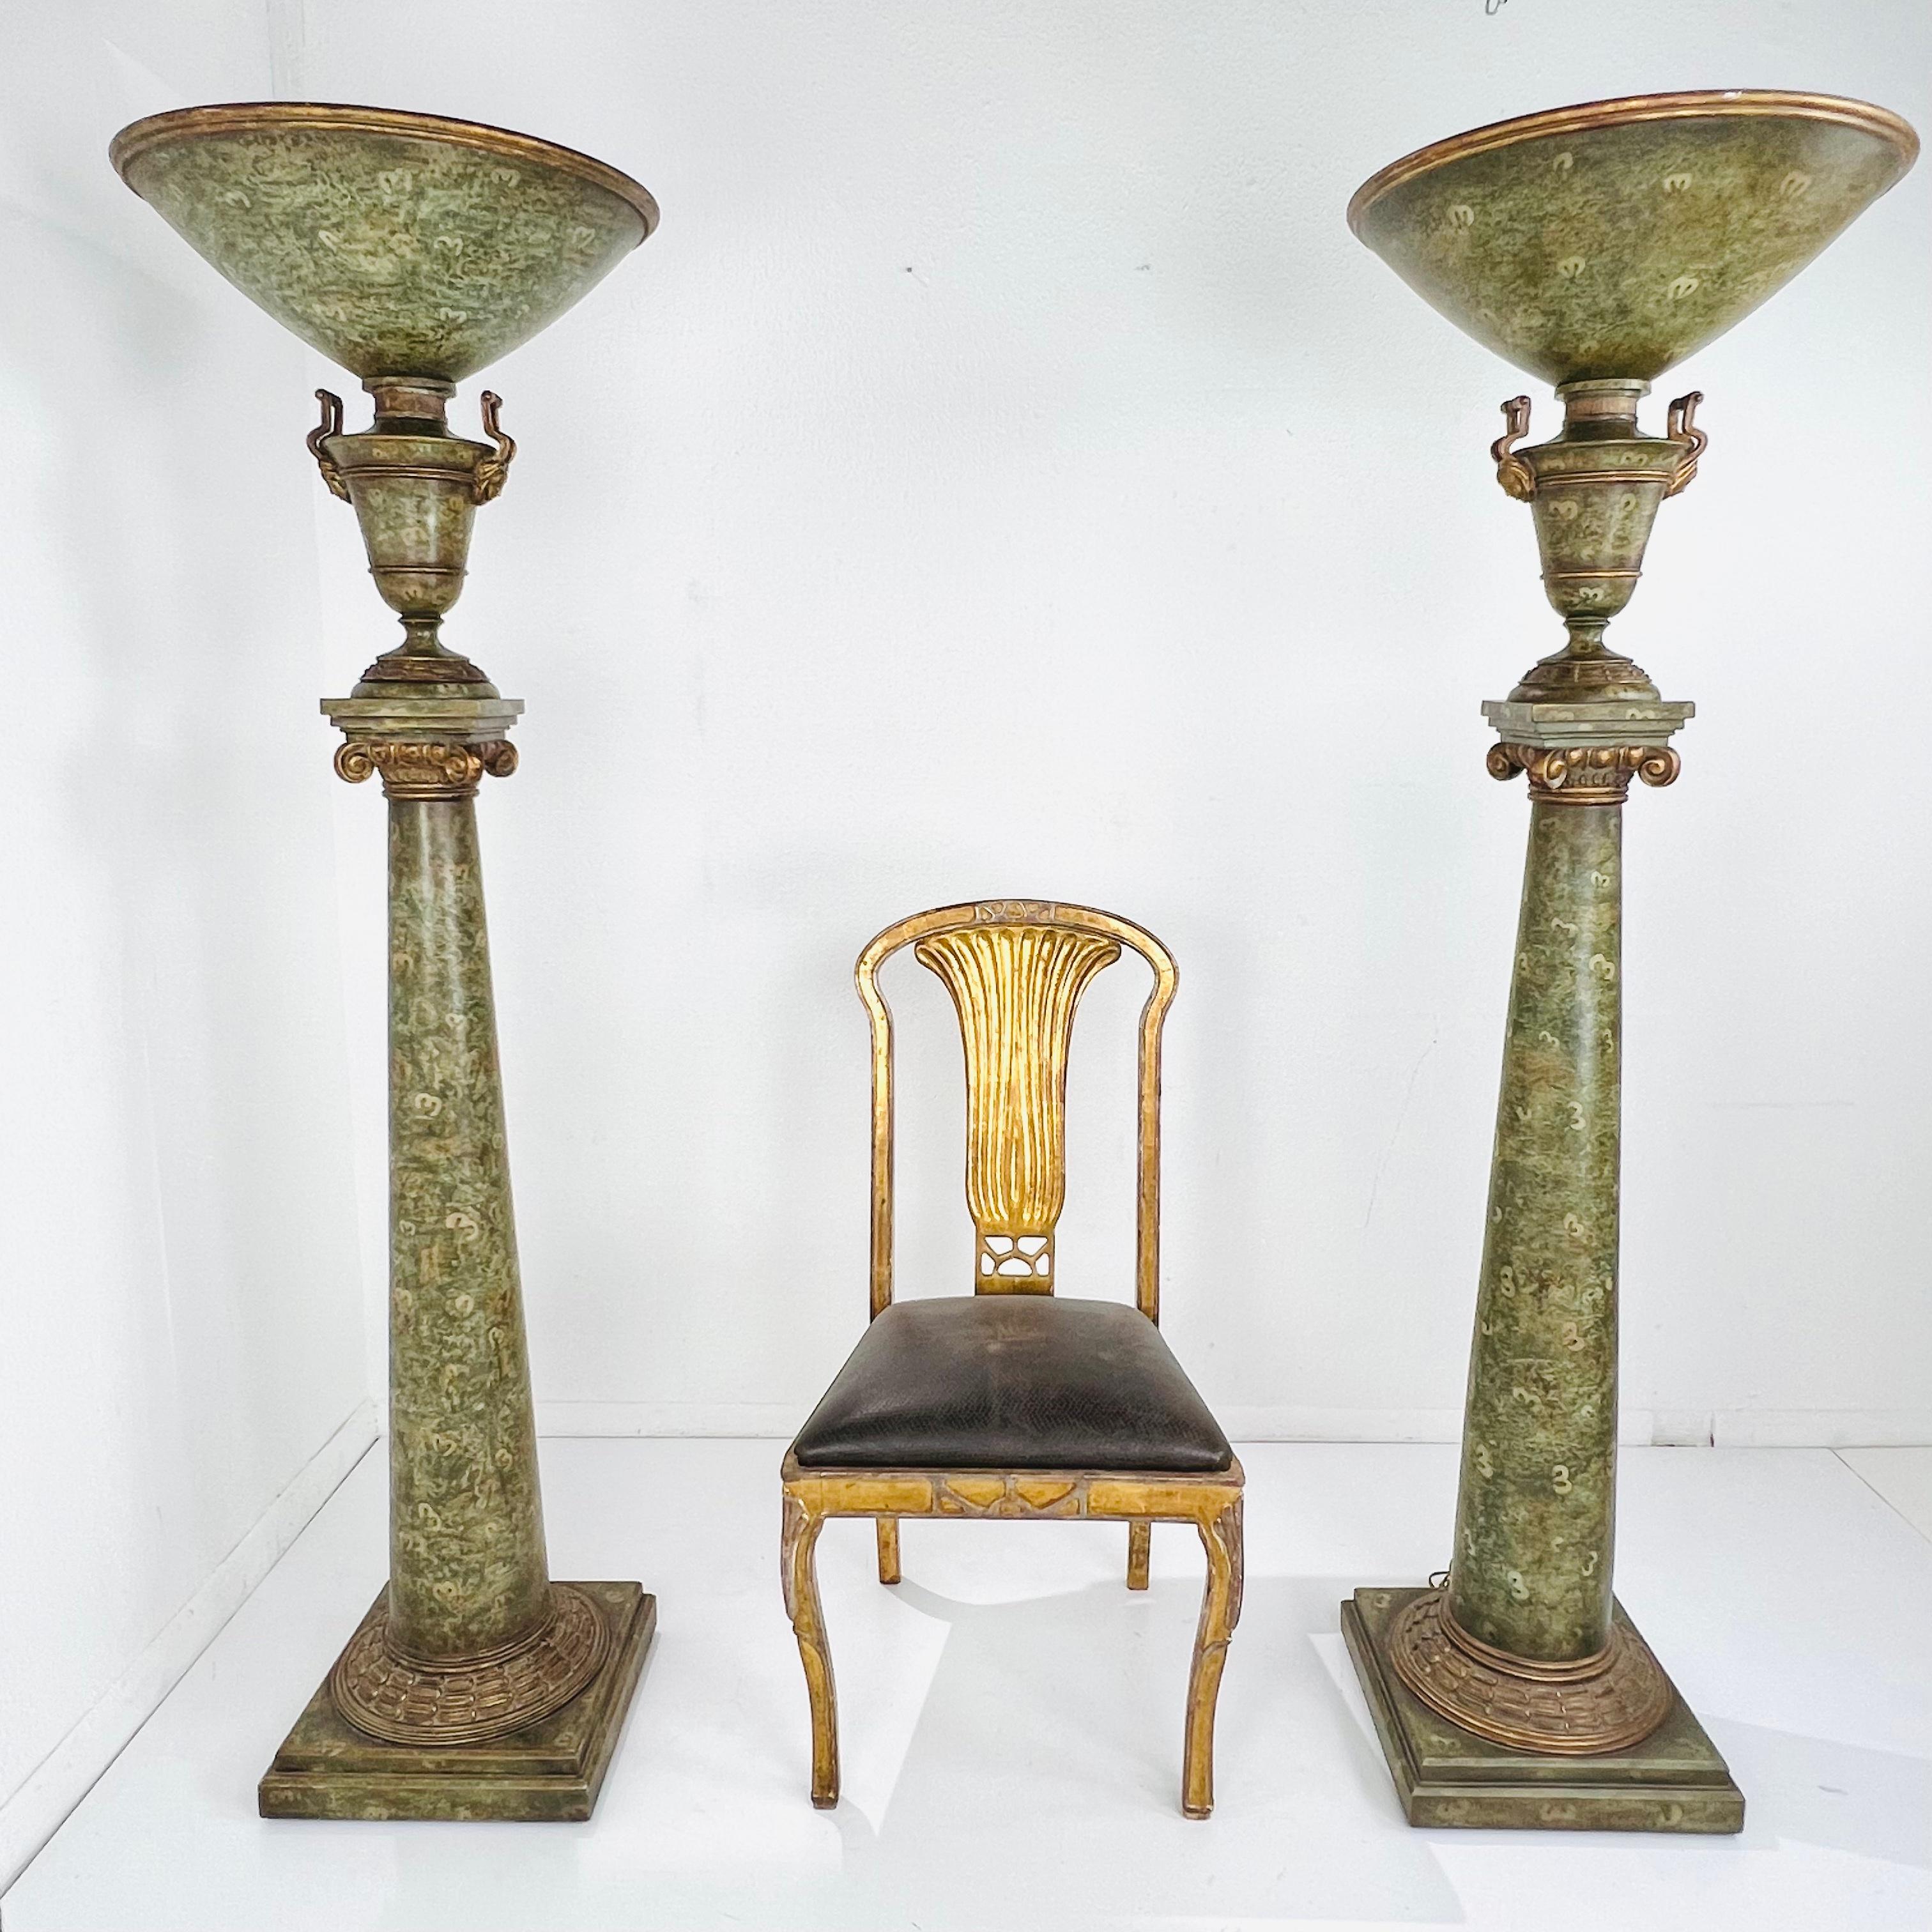 Unique pair of massive scale painted wood and metal floor lamps. Rich shades of green with gilded accents and ornate carved face and scroll detail. Good vintage condition, lights are tested and working.